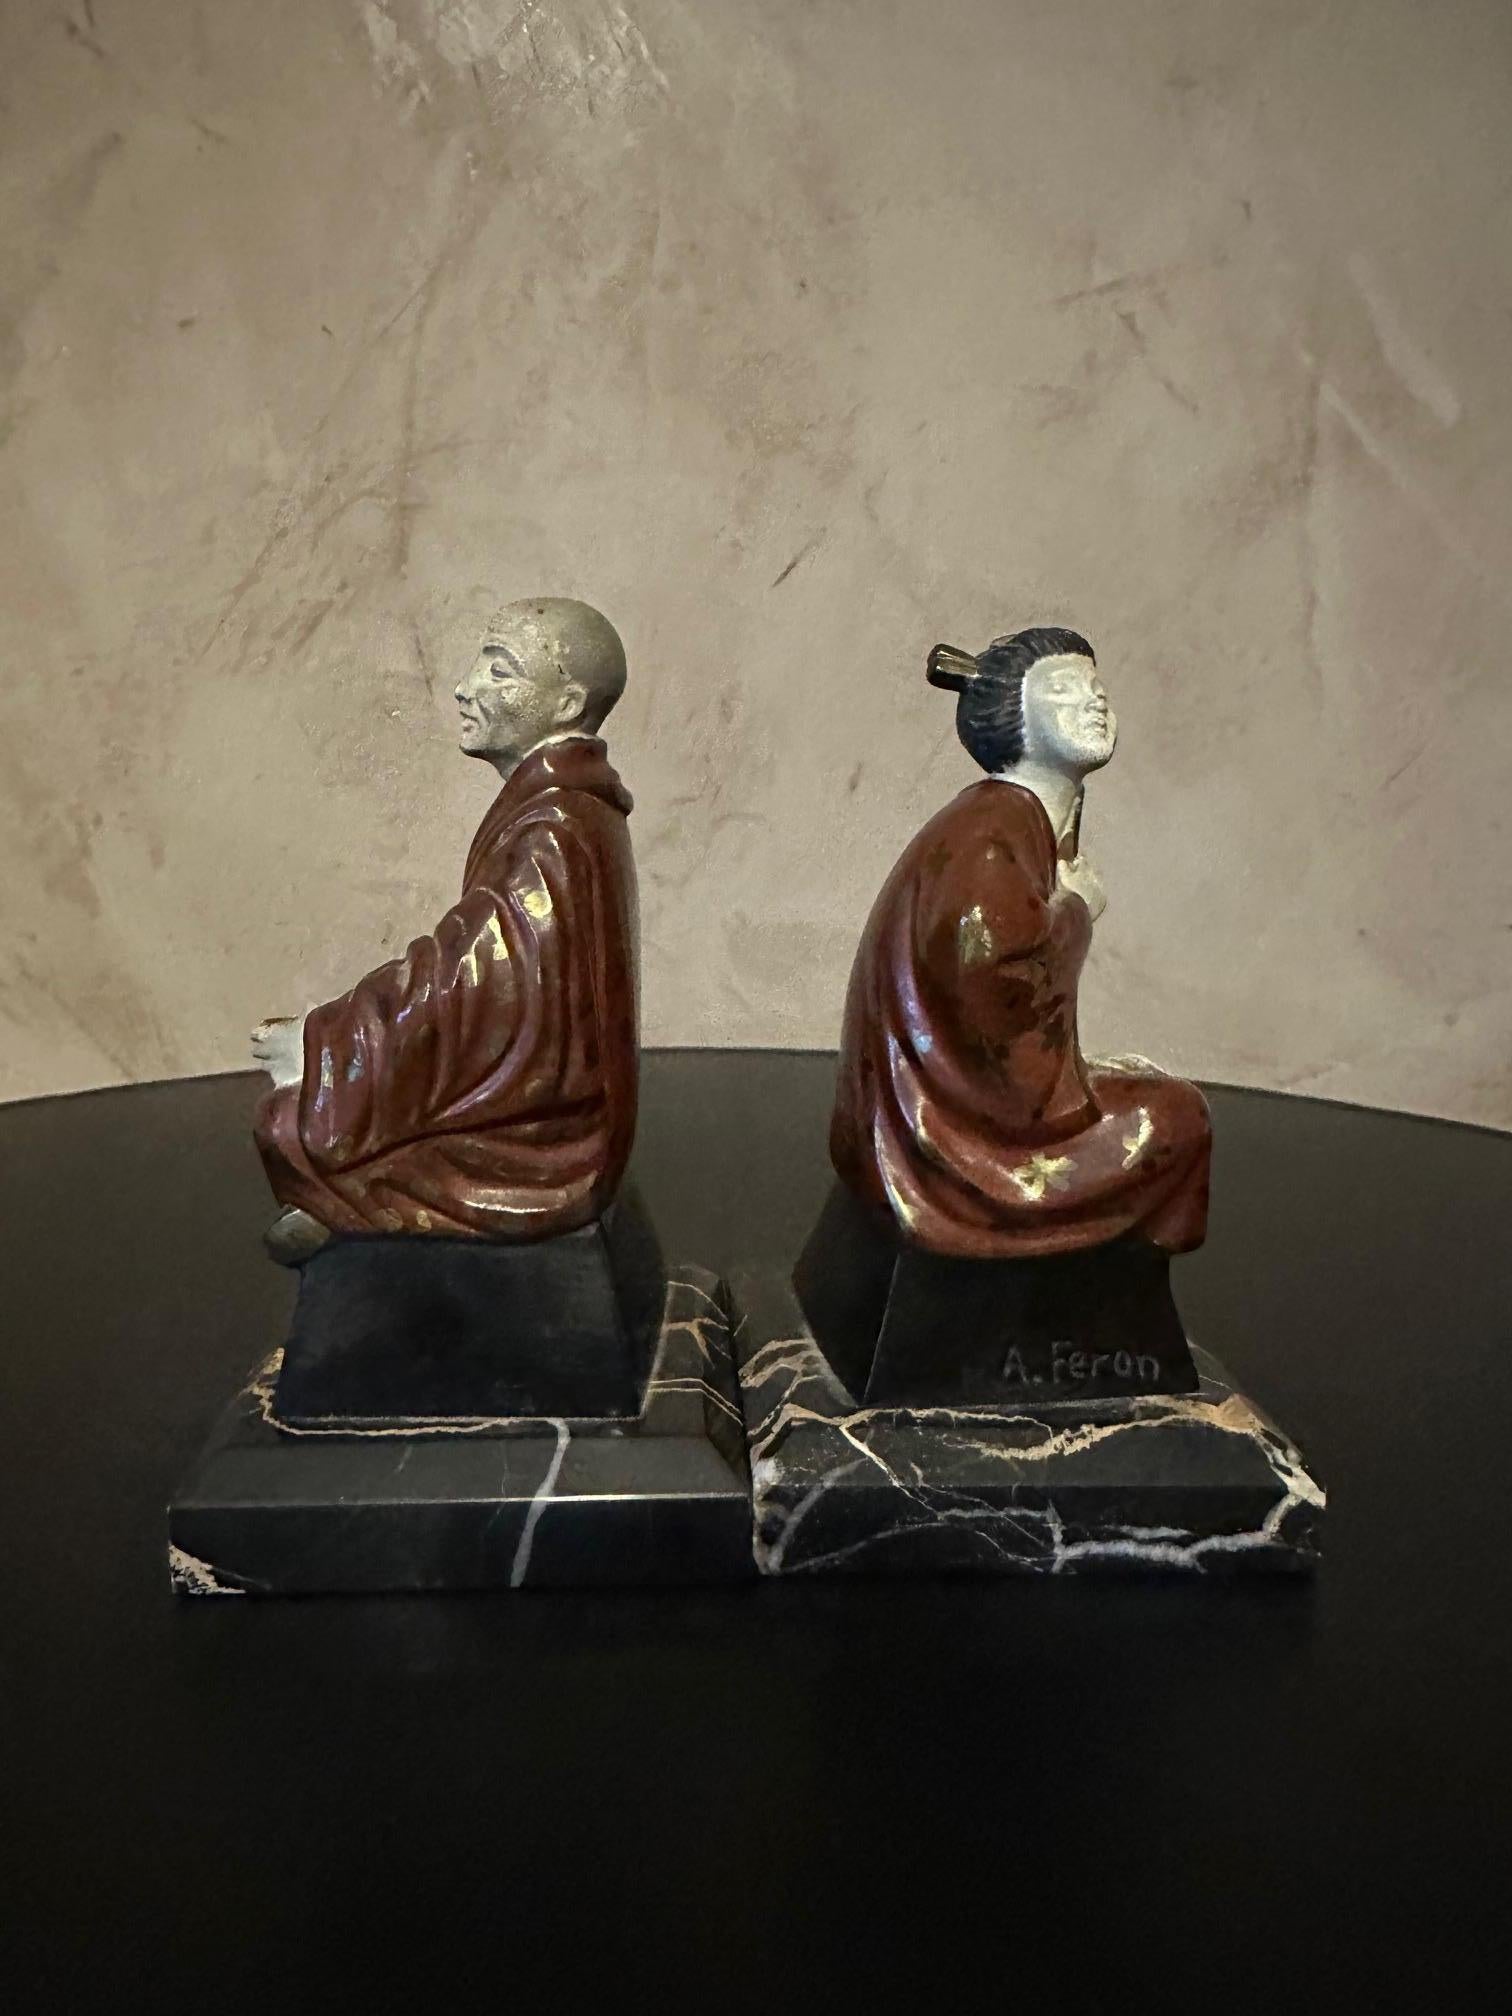 Pair of painted spelter bookends on a marble base dating from the 1930s representing a monk and a geisha. Adam Feron signature on each character.
Paint faded in some places but overall good condition.
Nice quality.